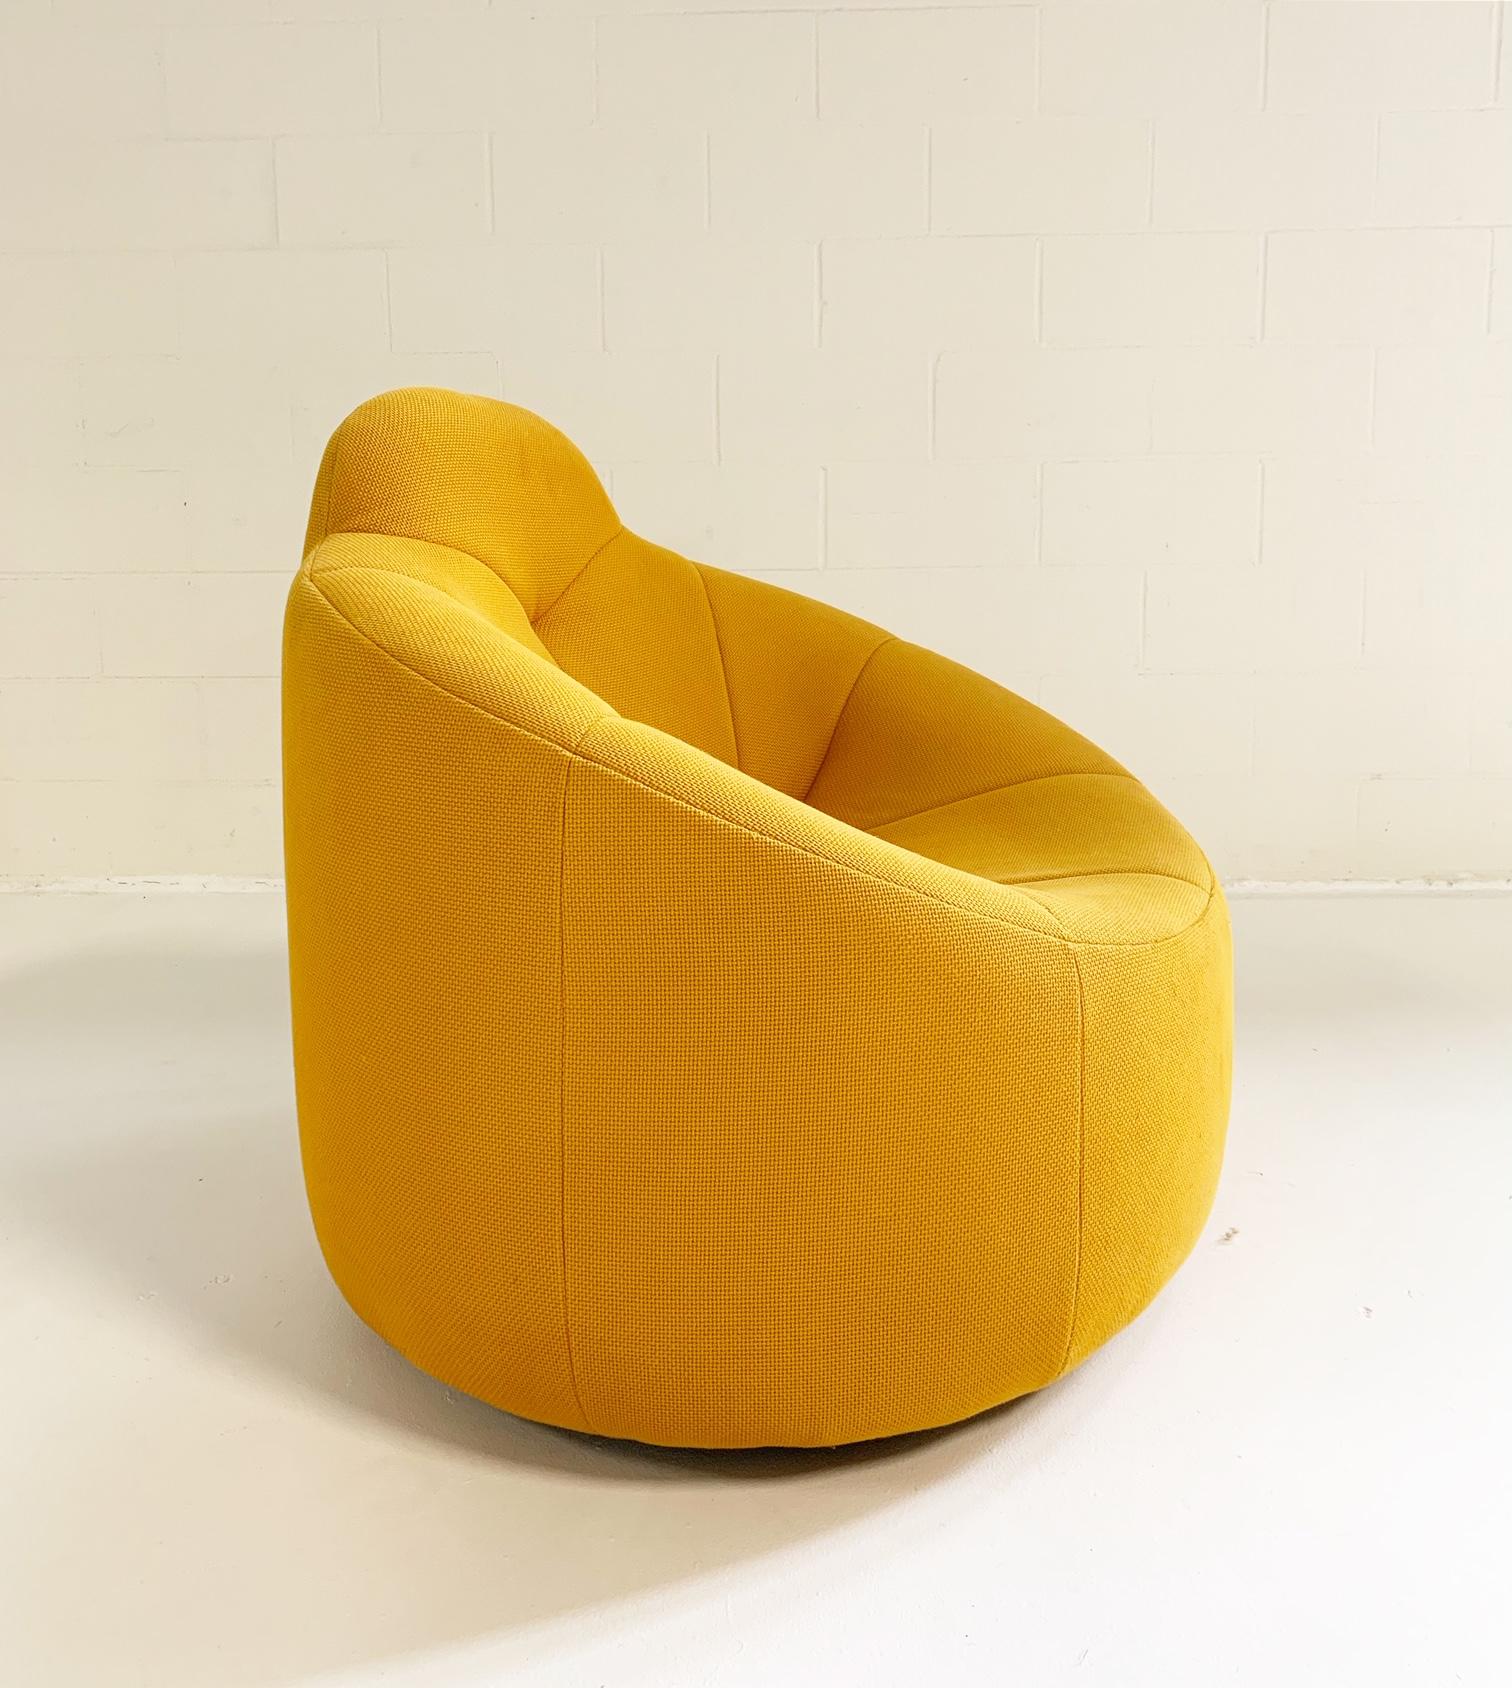 From Ligne Roset website: As suggested by its name, soft, organic, round shapes and firm seating comfort all characterize the Pumpkin collection. Resisting its appeal is impossible!

We collected this chair and loved the bright, fun upholstery, so